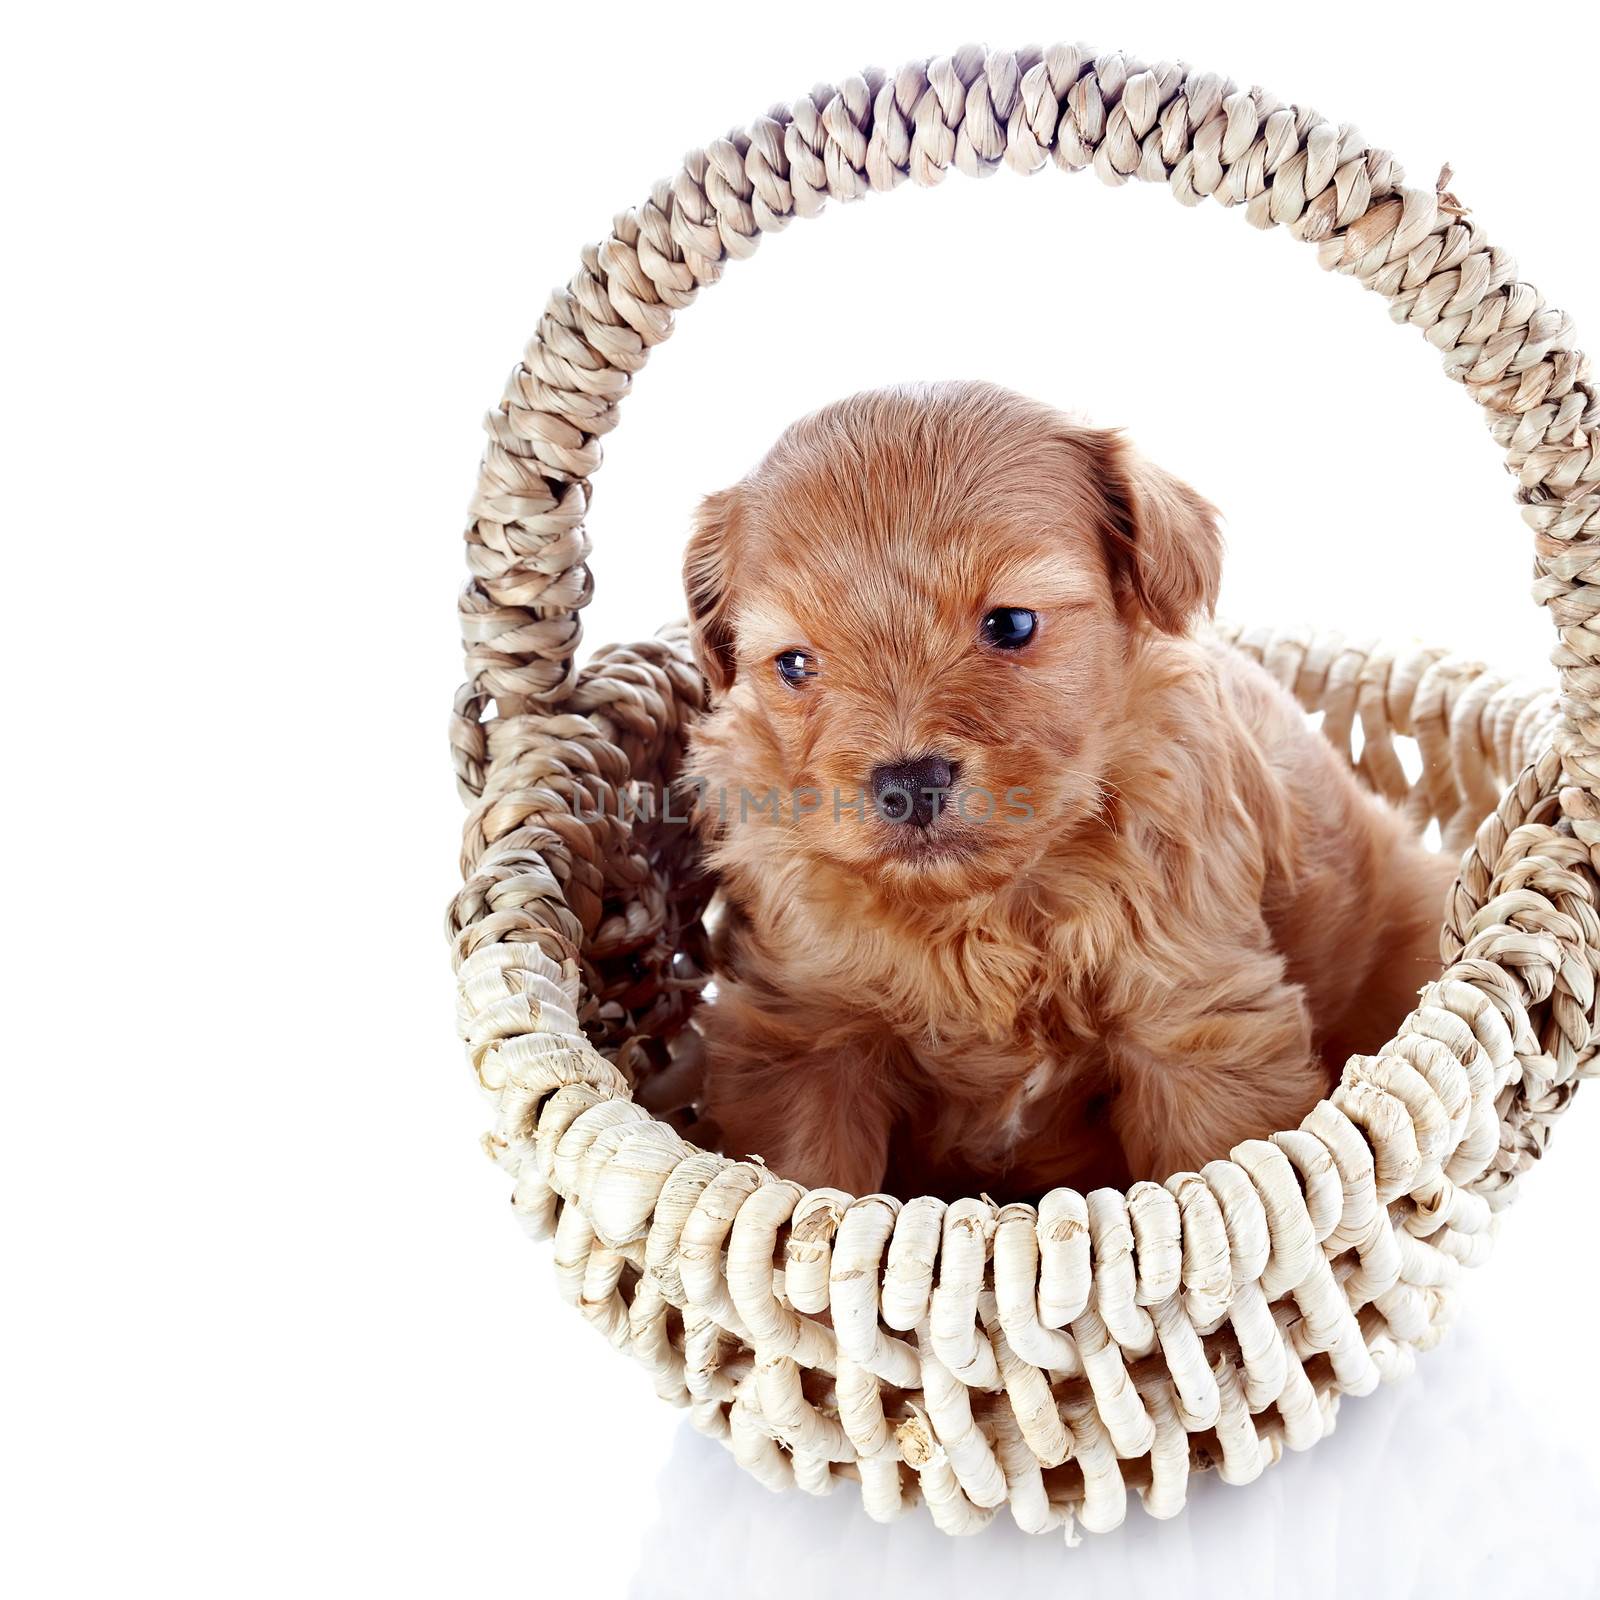 Puppy in a wattled basket. Puppy of a decorative doggie. Decorative dog. Puppy of the Petersburg orchid on a white background